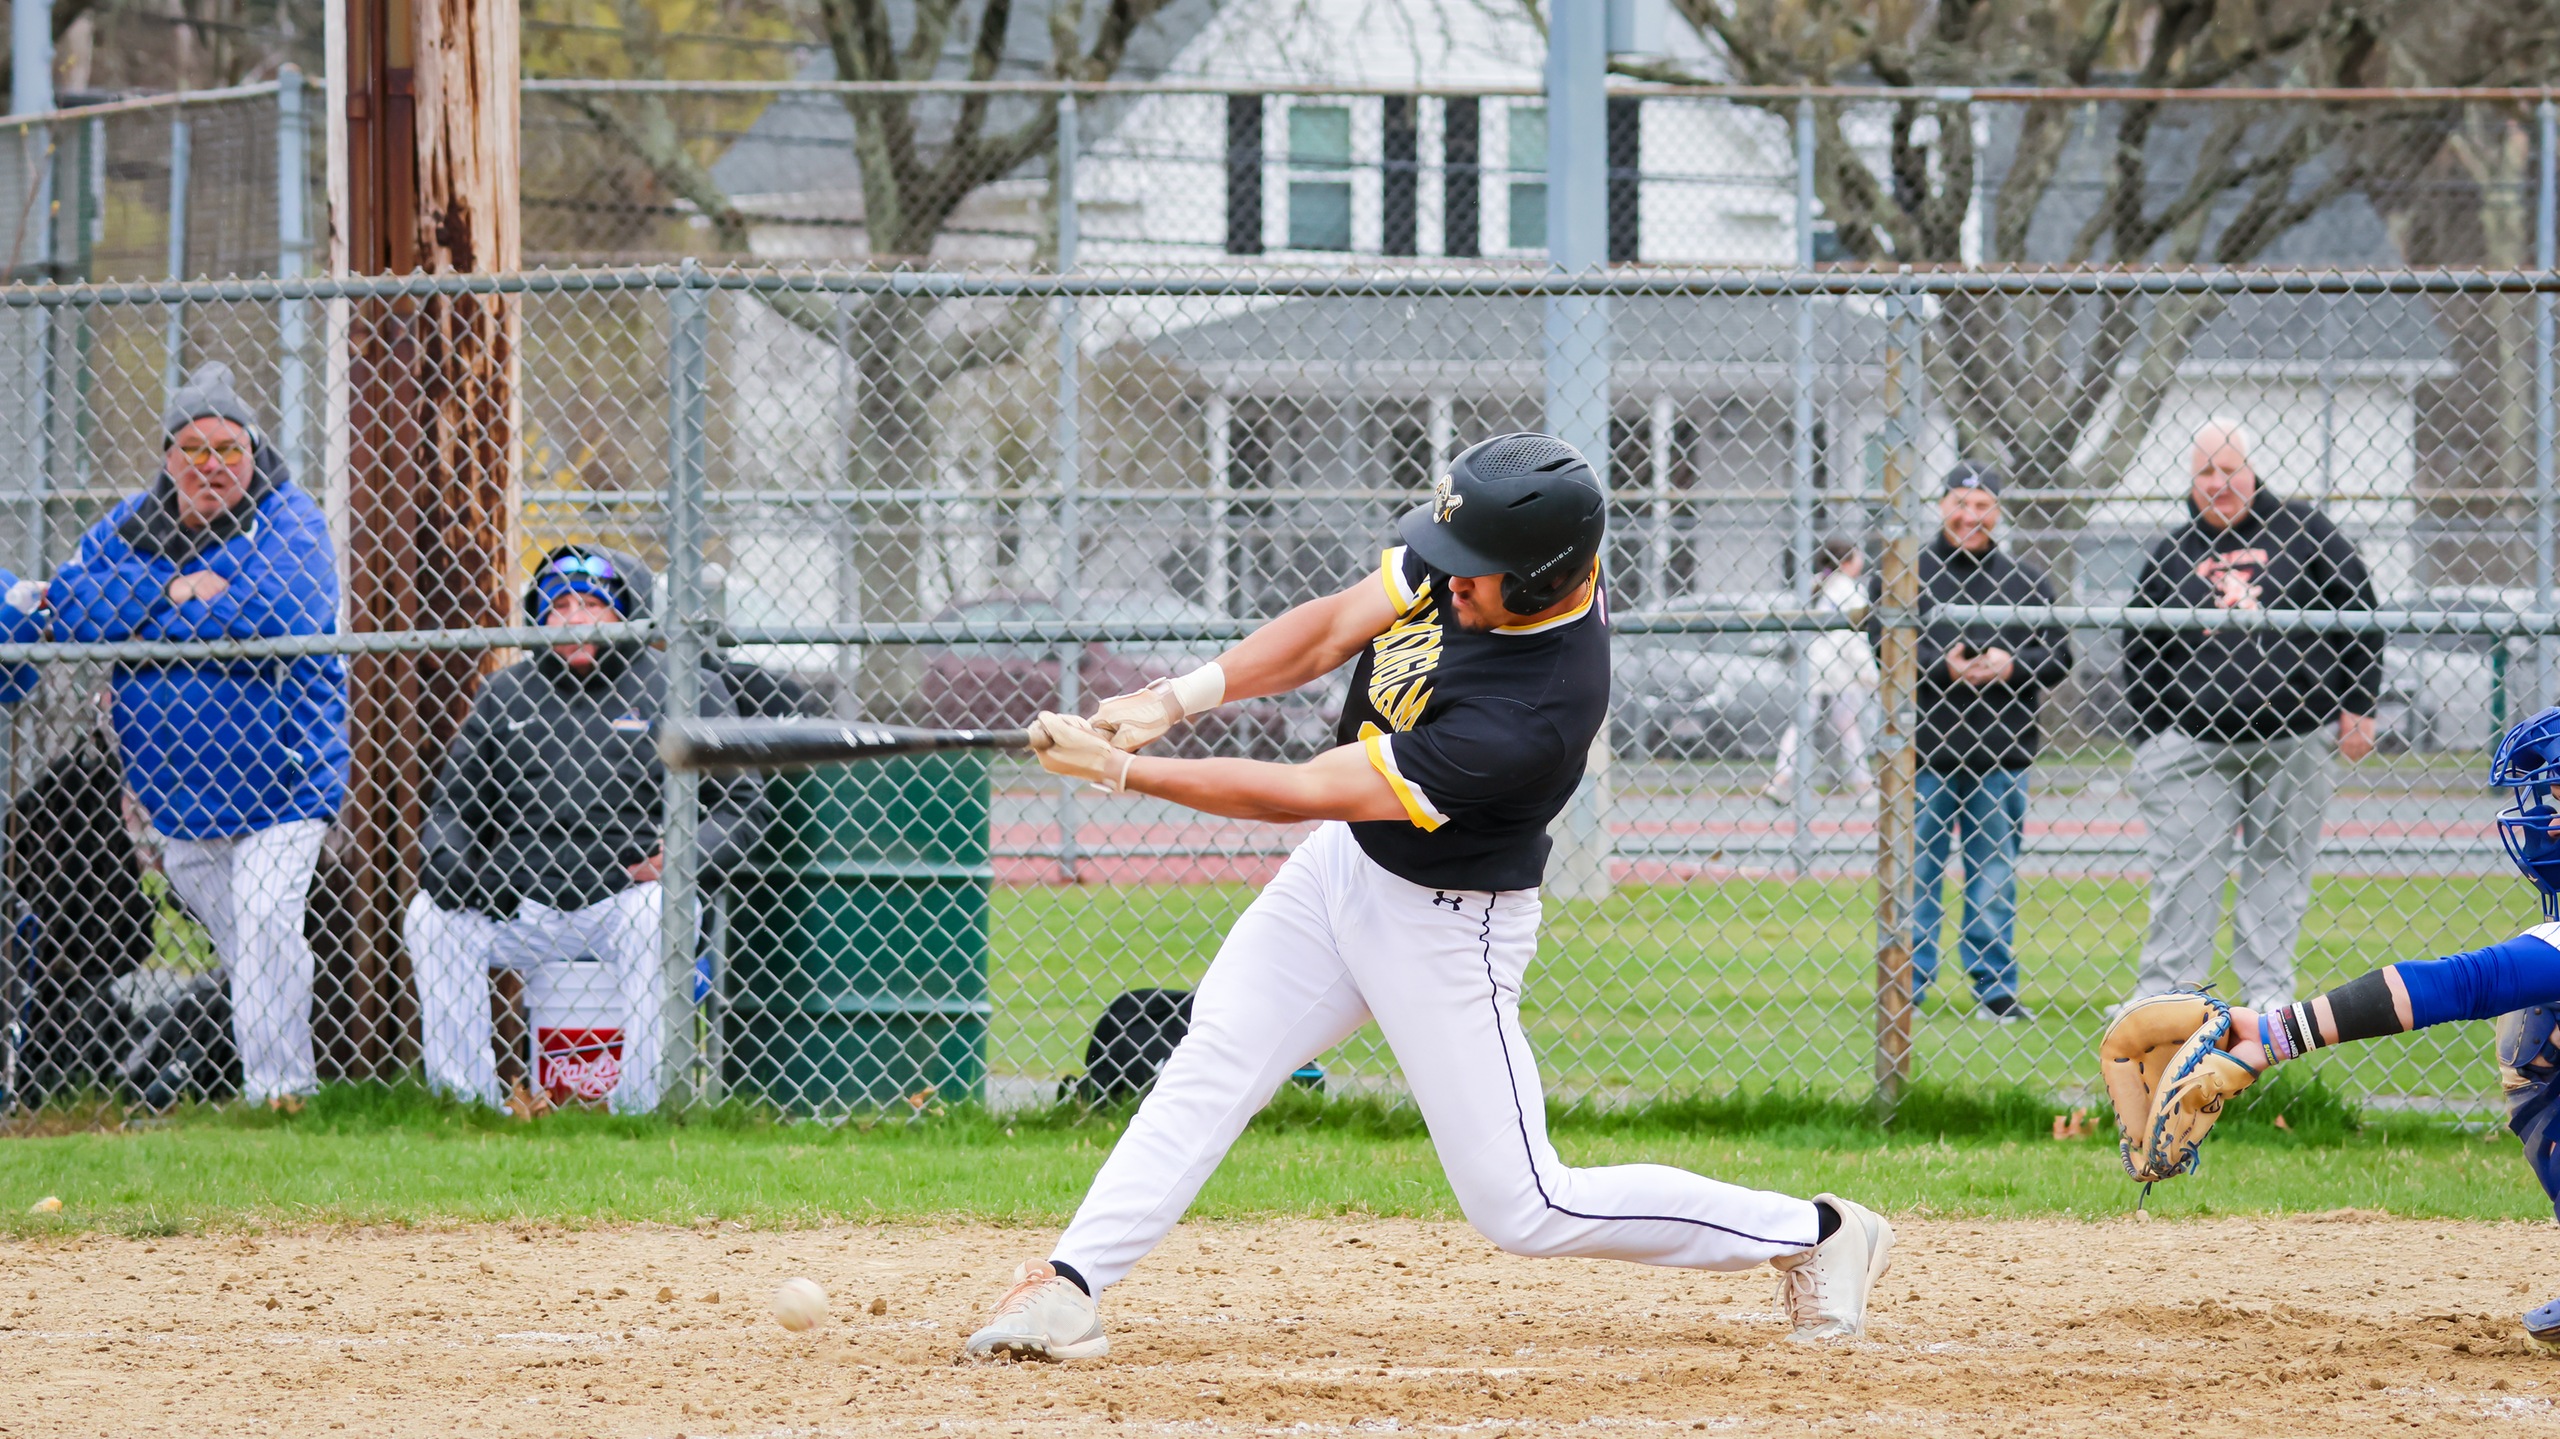 Baseball Splits Doubleheader with Fitchburg State to Earn Share of MASCAC Regular Season Title